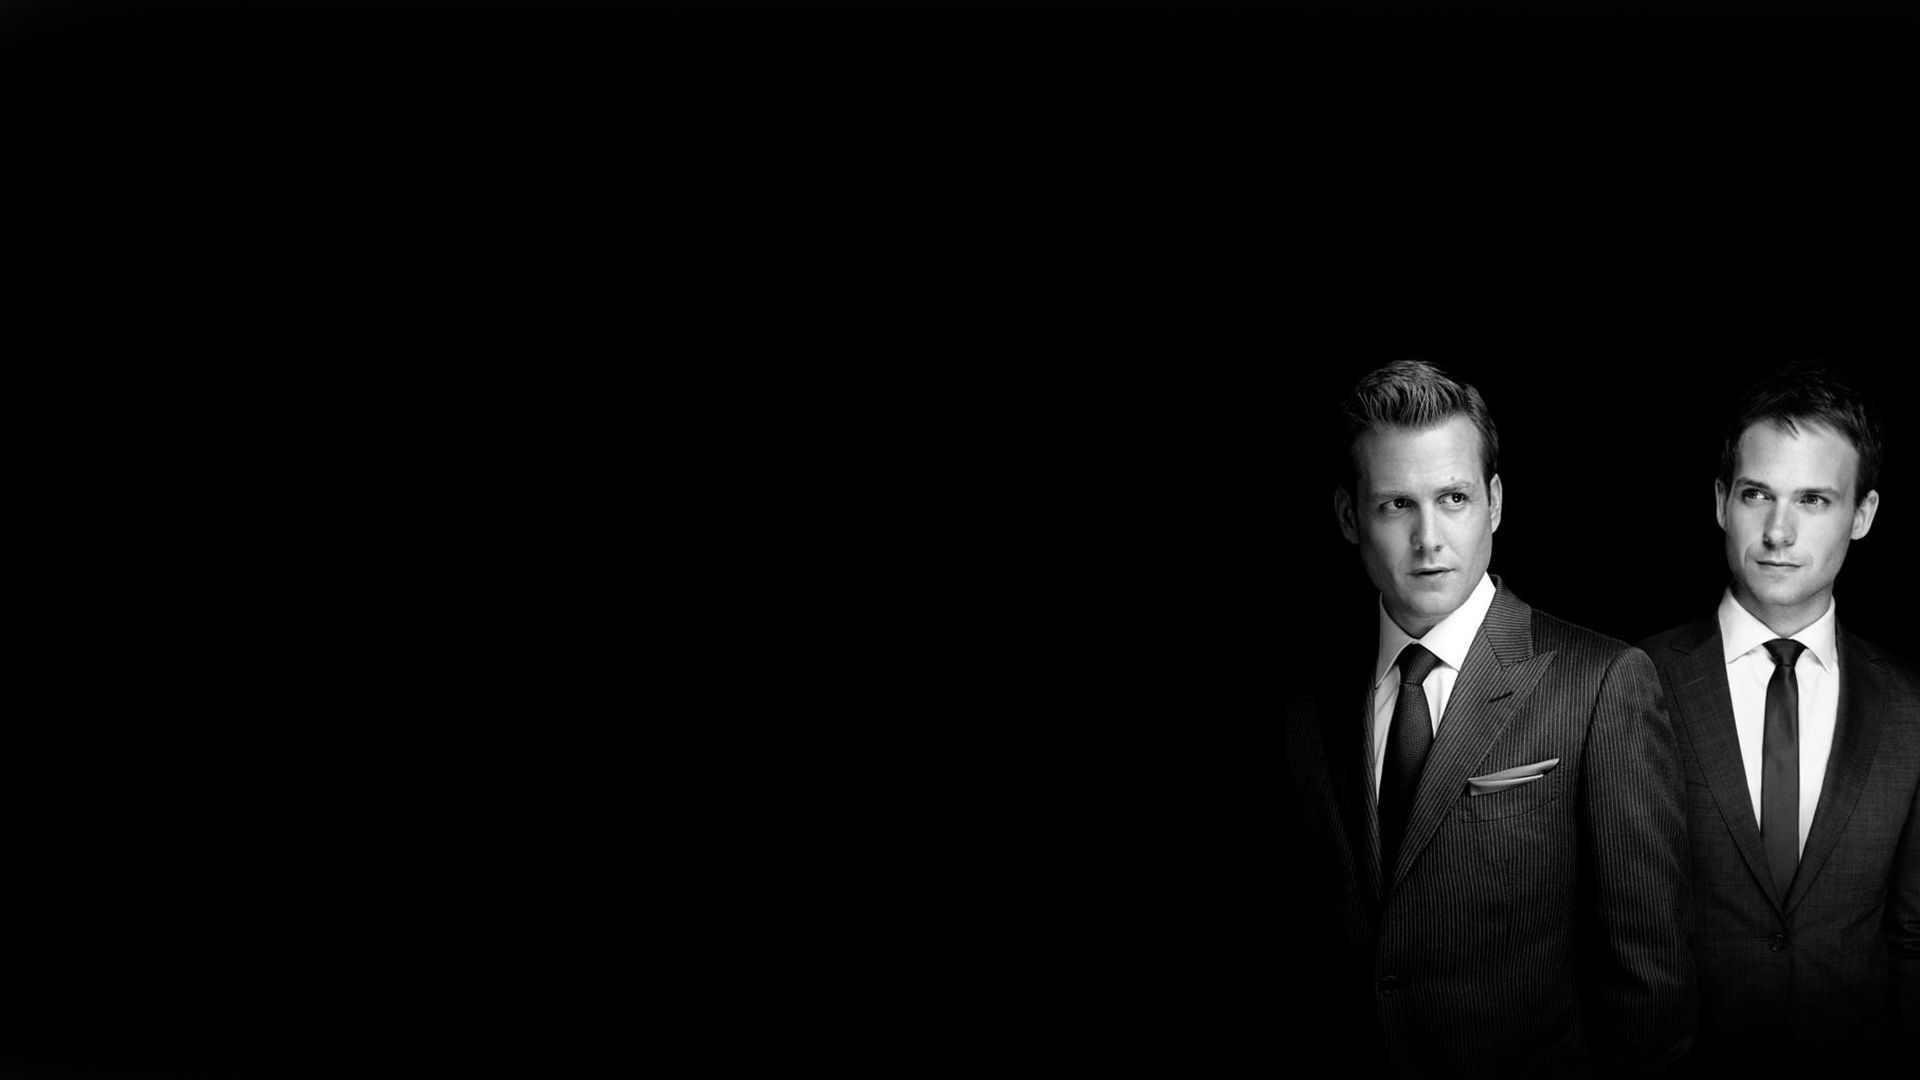 10 Quotes By “harvey Specter” Will Make Your Day - Harvey Specter Life Quotes , HD Wallpaper & Backgrounds